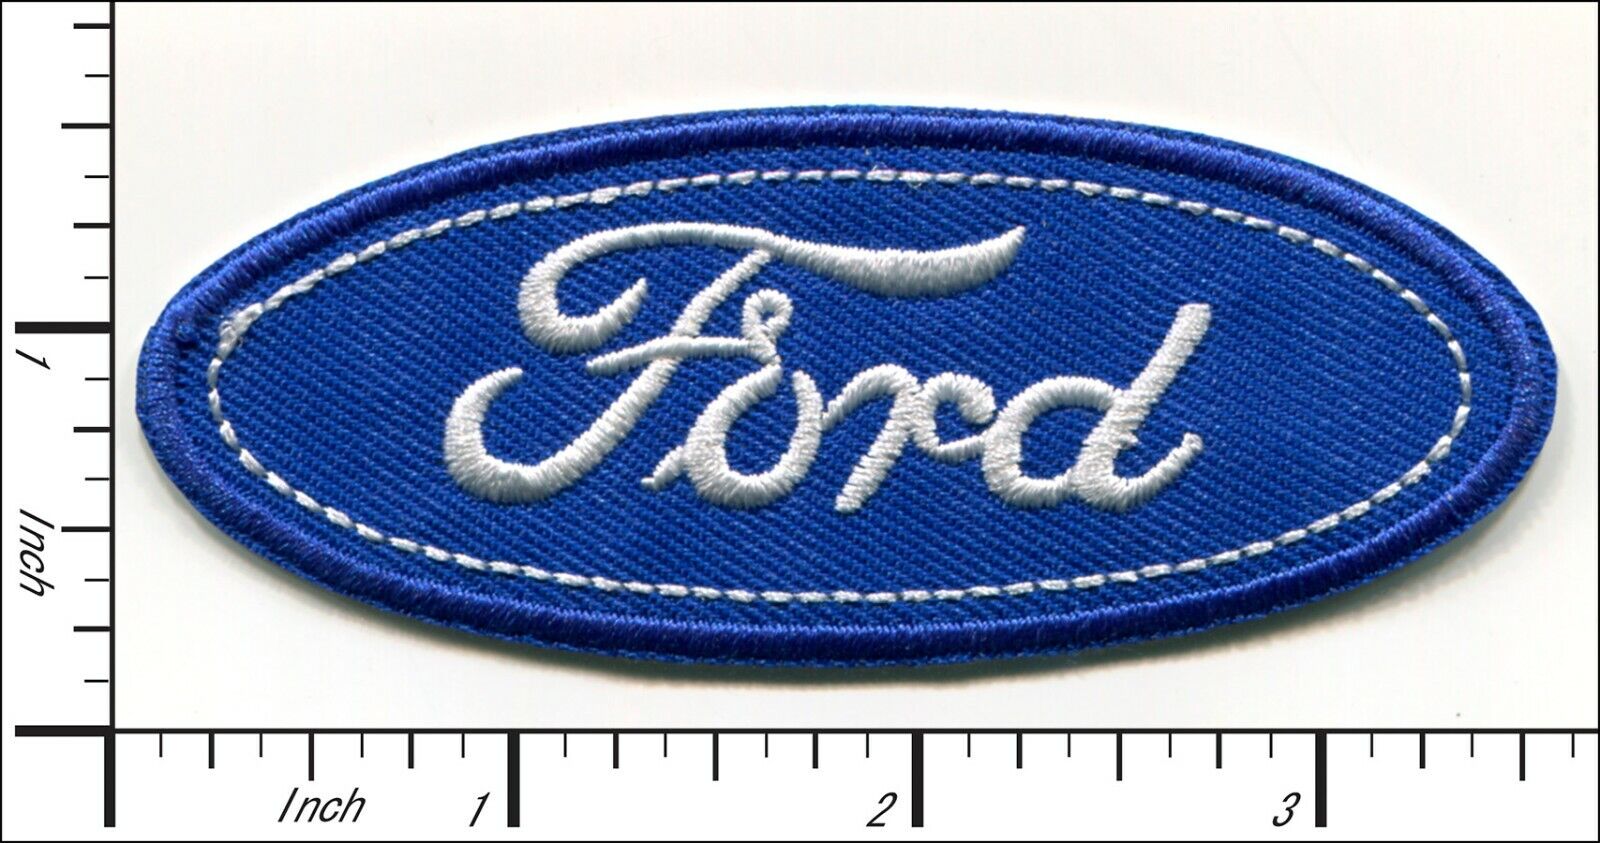 30 Pcs Embroidered Iron on patches Ford Motors Emblem AP063fD1  Unbranded